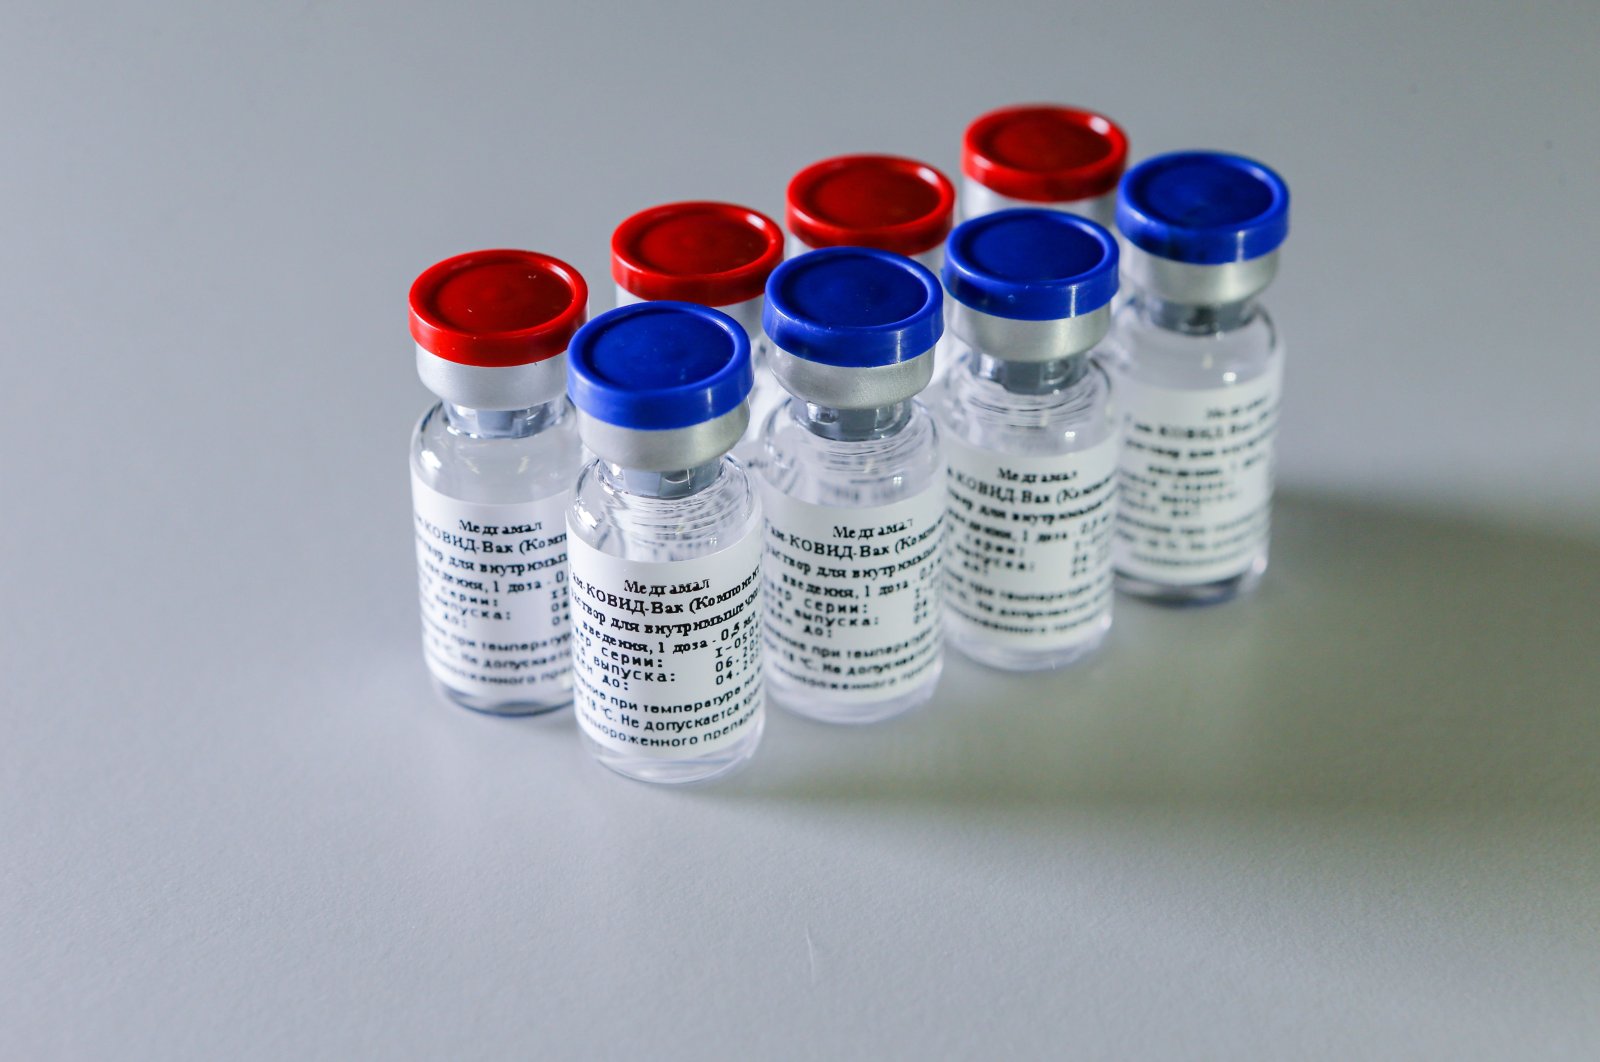 The vaccine against the coronavirus disease developed by the Gamaleya Research Institute of Epidemiology and Microbiology, Aug. 6, 2020. (Russian Direct Investment Fund via AFP)